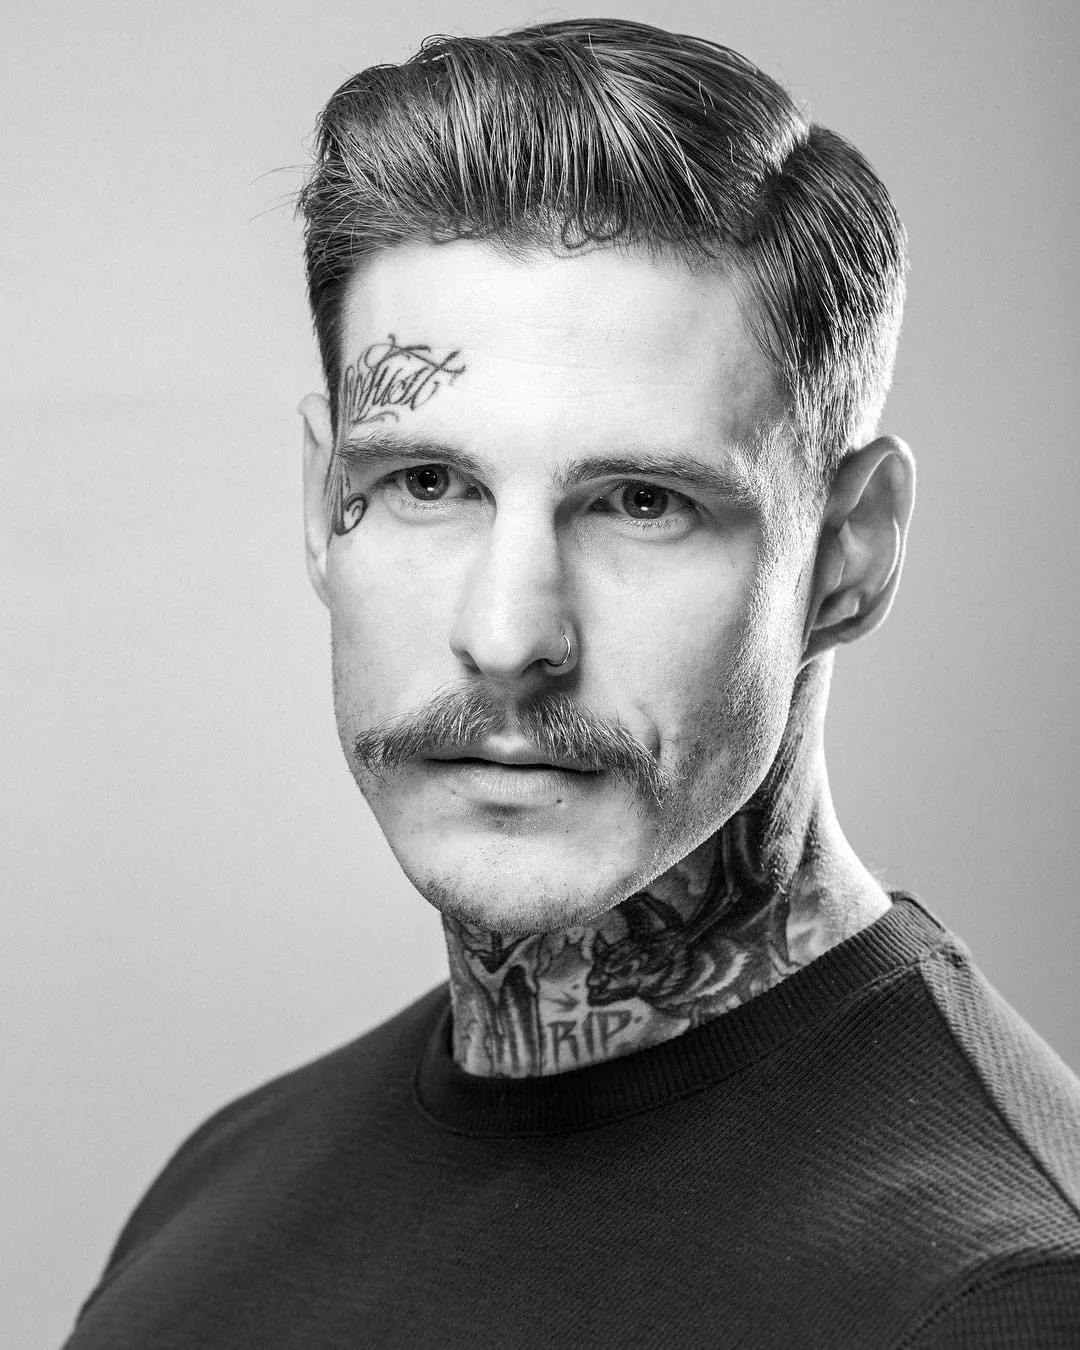 Guy with a peaky blinders haircut and face and neck tattoos